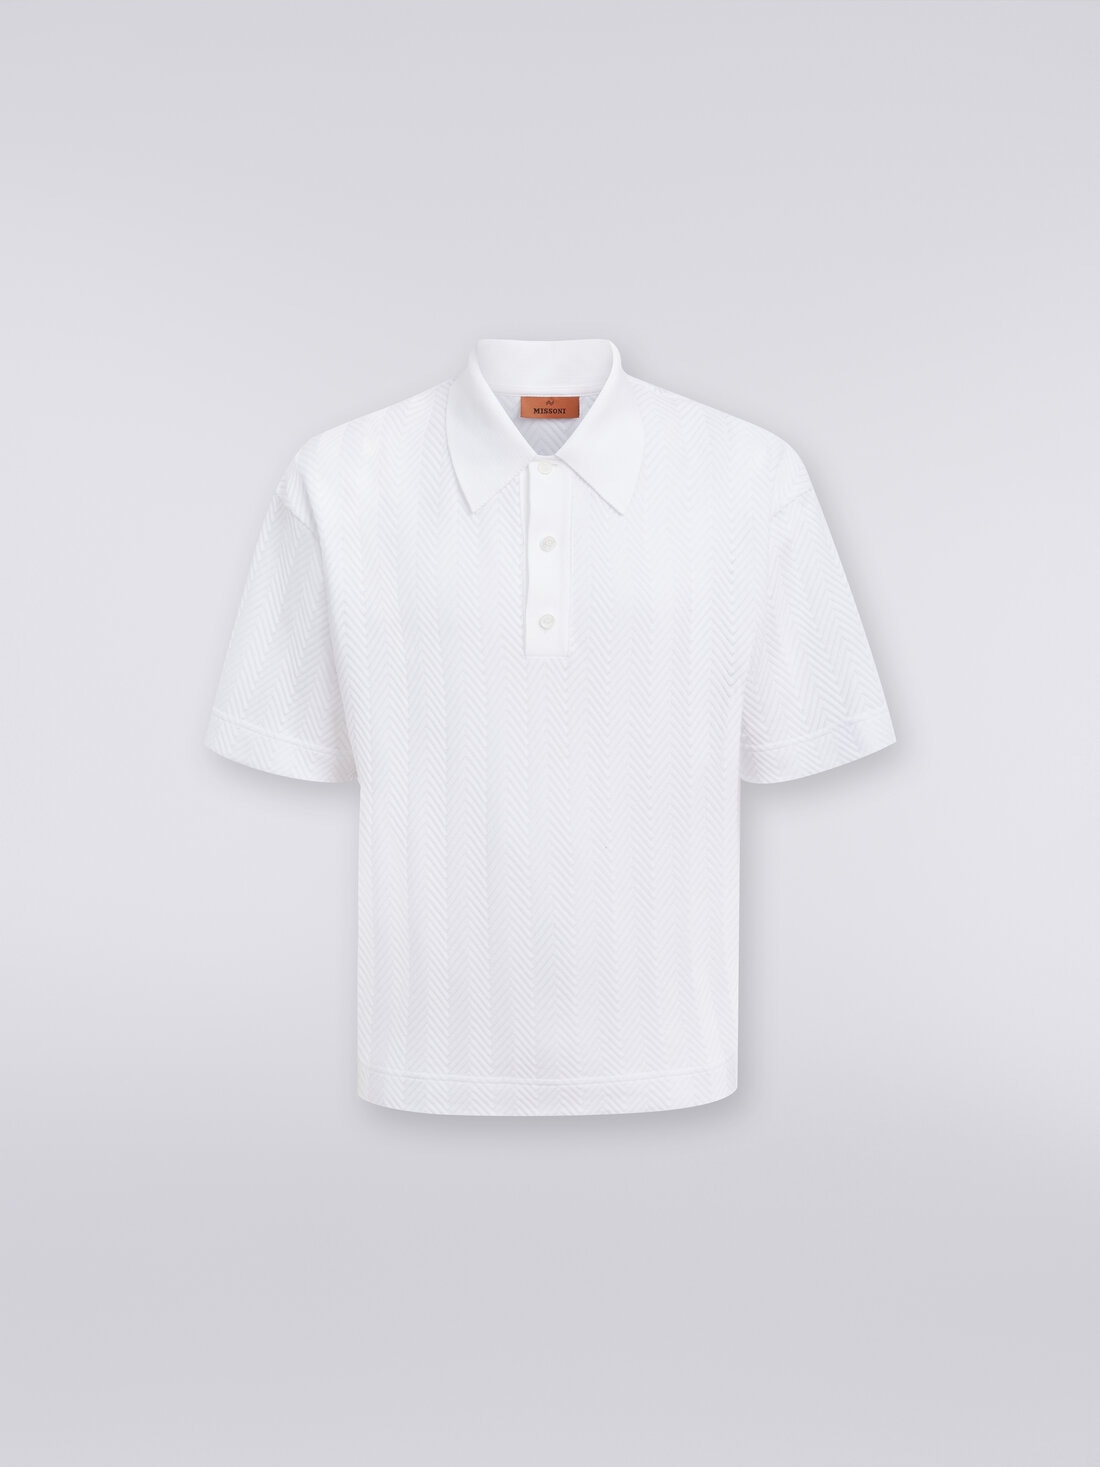 Short-sleeved polo shirt in chevron viscose and cotton, White  - US24S203BR00JC10601 - 0